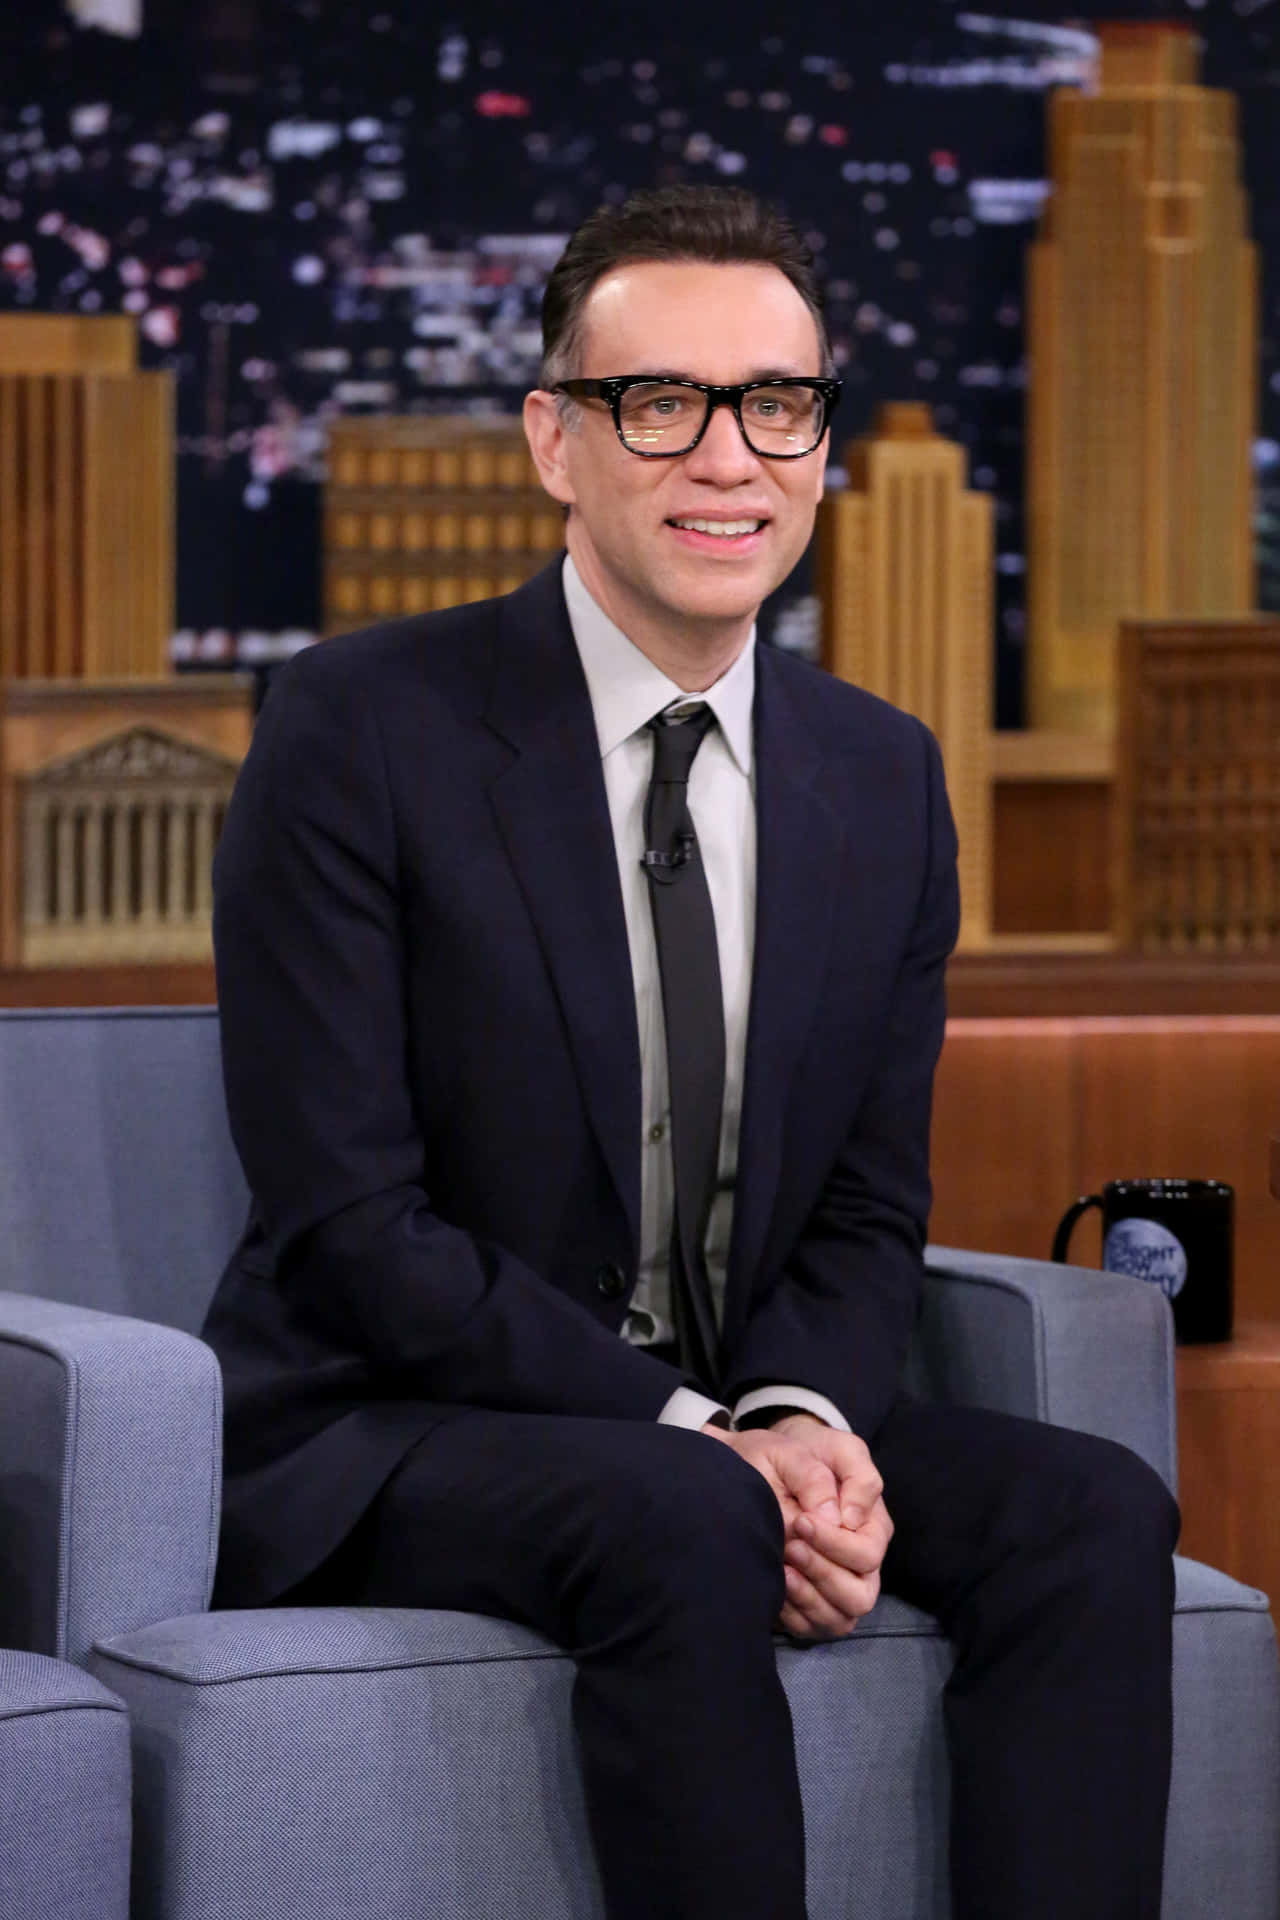 Comedian Fred Armisen rocks the stage with his unique style Wallpaper